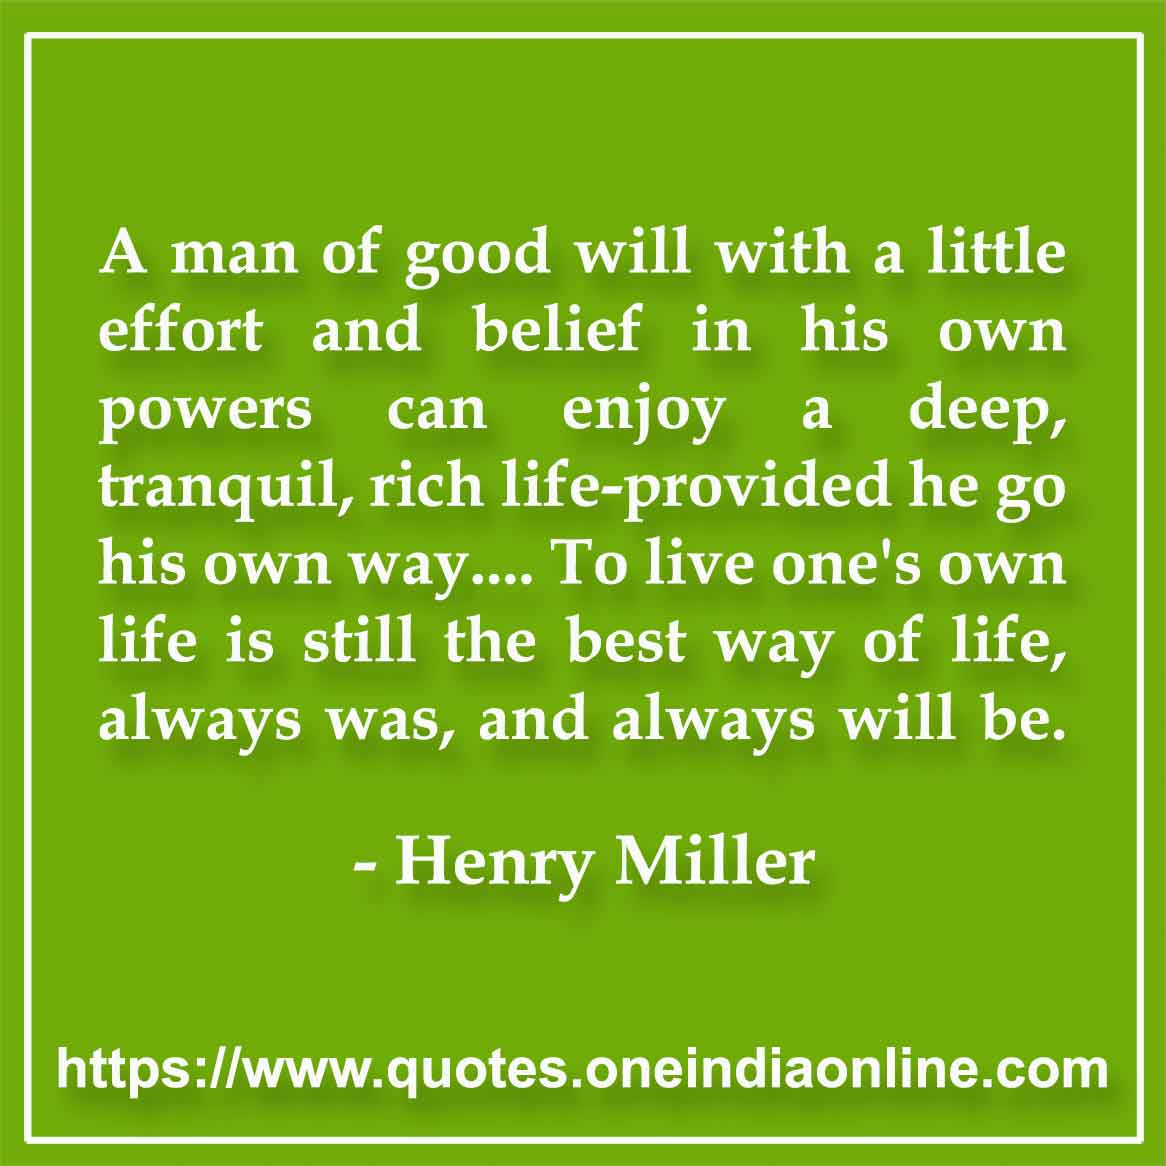 A man of good will with a little effort and belief in his own powers can enjoy a deep, tranquil, rich life-provided he go his own way.... To live one's own life is still the best way of life, always was, and always will be.

-  Henry Miller